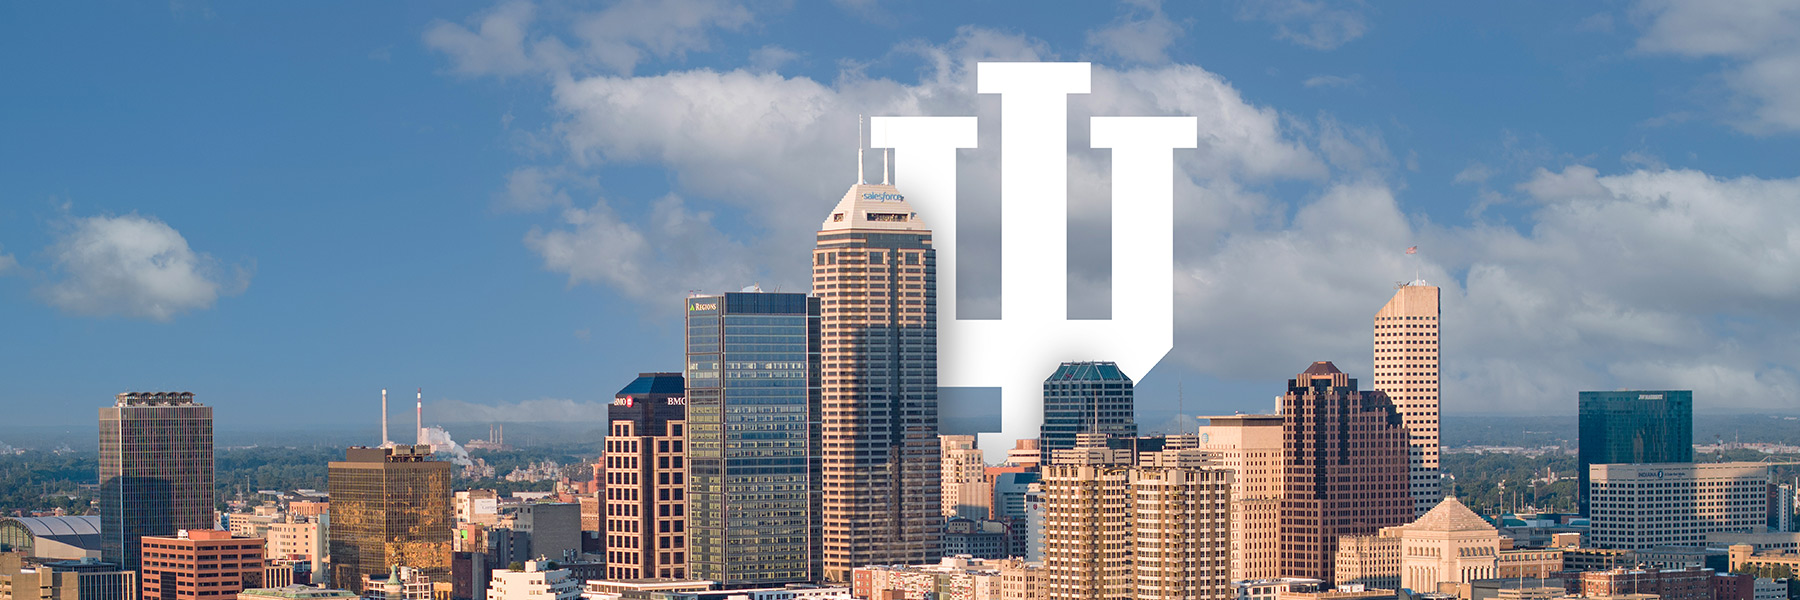 The Indianapolis skyline is pictured on a blue sky day, the IU Trident stands within the city, rising above the buildings.